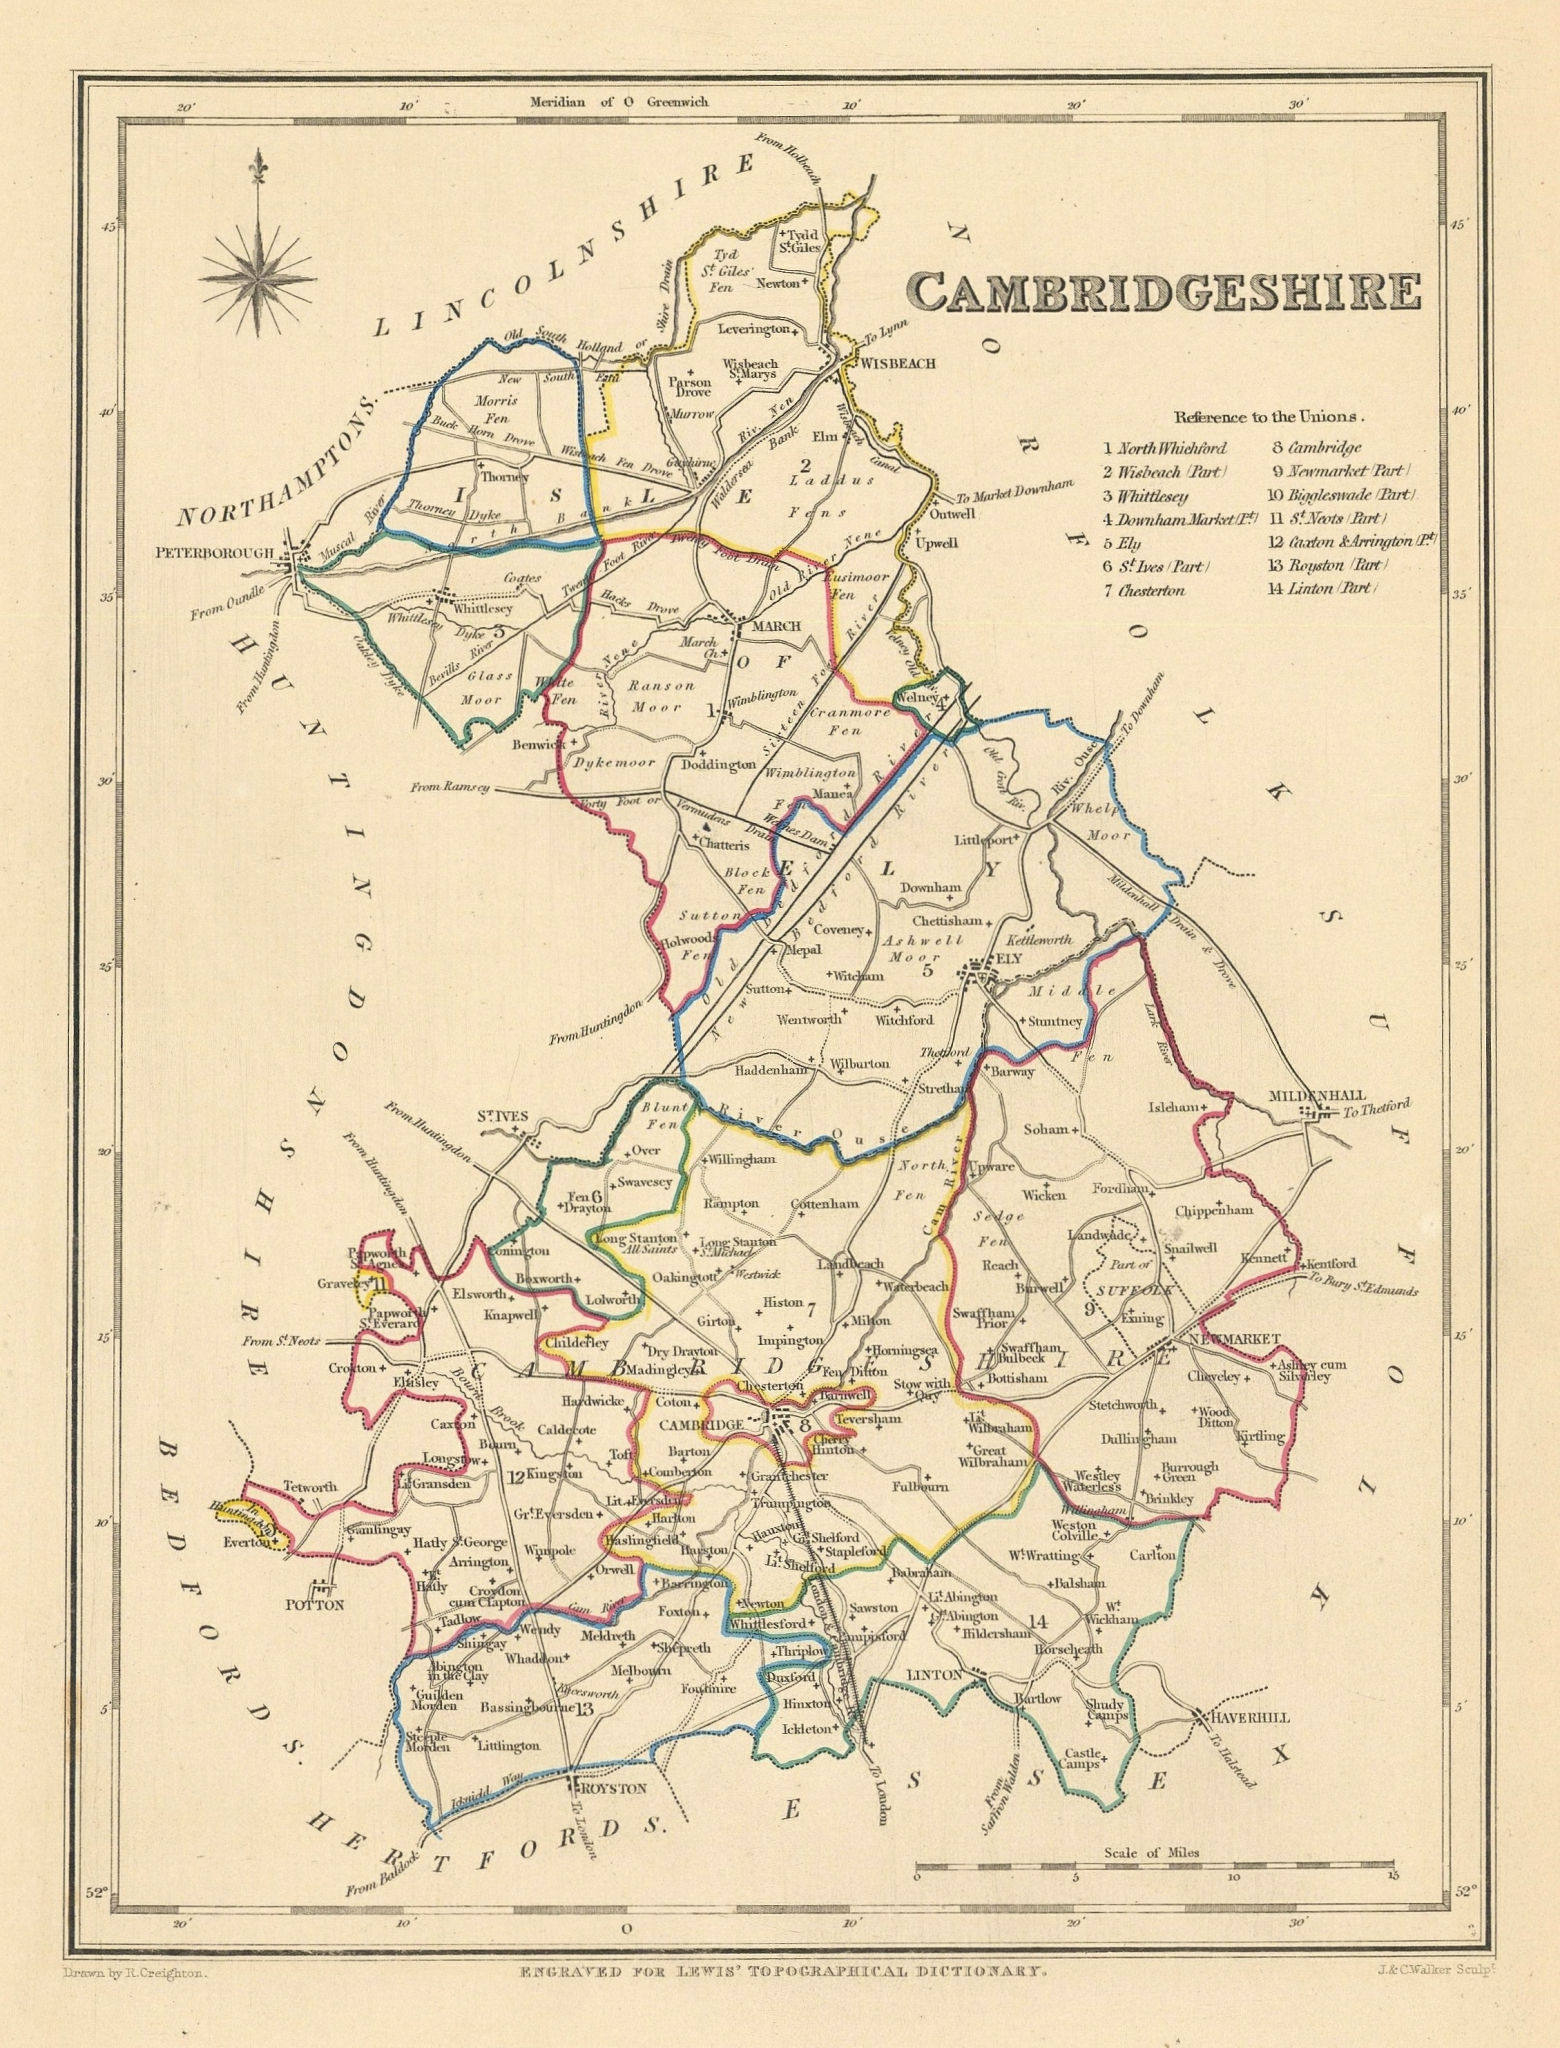 Associate Product Antique county map of CAMBRIDGESHIRE by Creighton & Walker for Lewis c1840